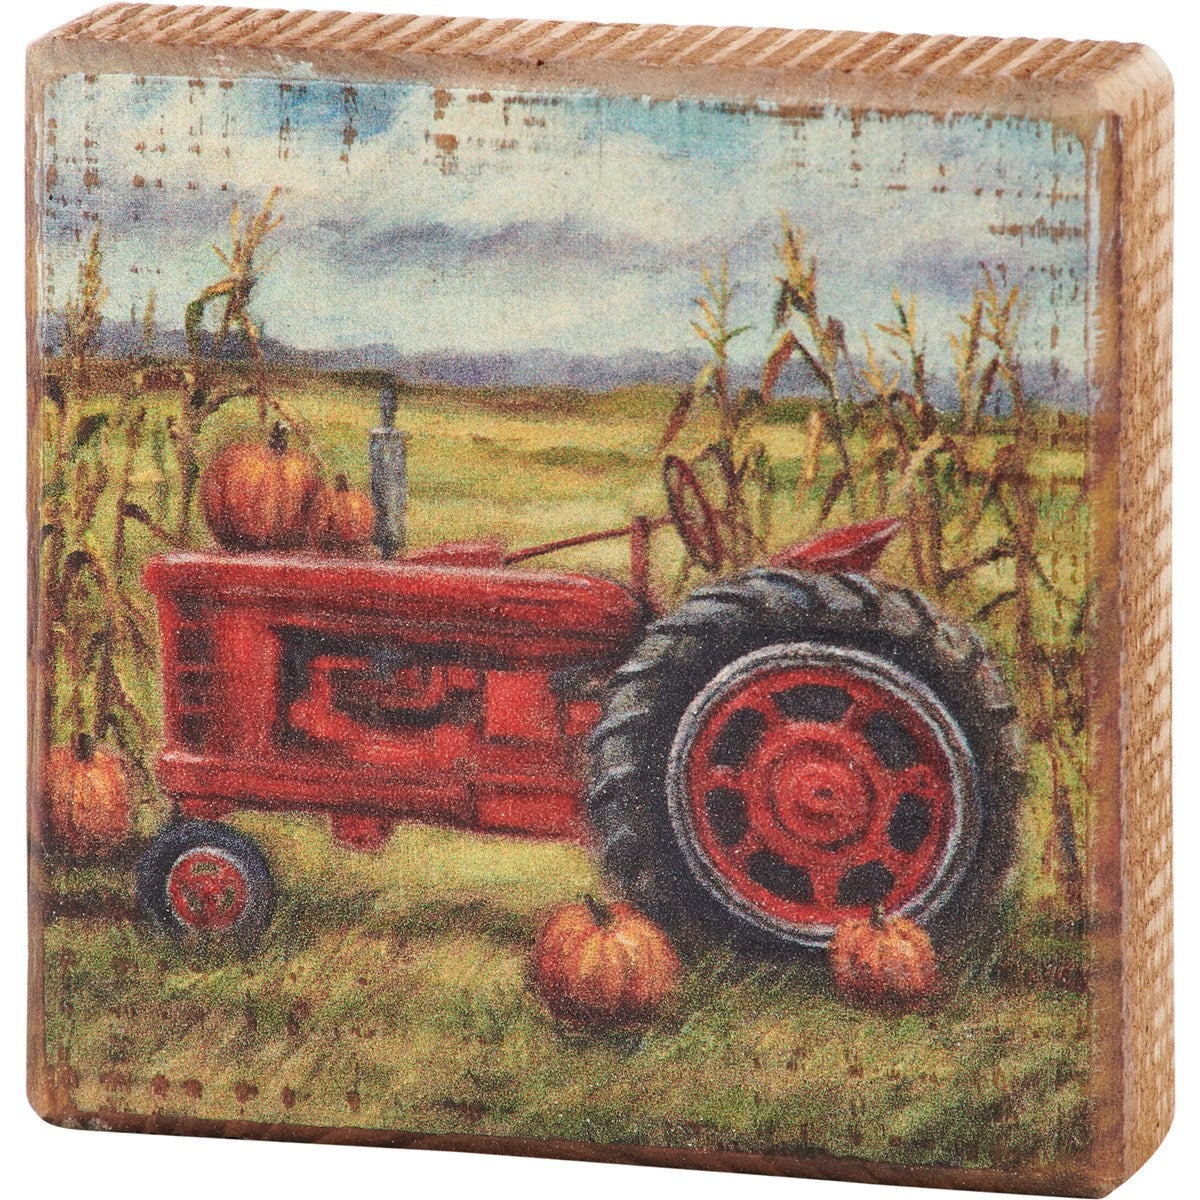 Stack of Jacks, Raven, Fall Leaves, Fall Tractor, Mums, Curious Fox Block Signs